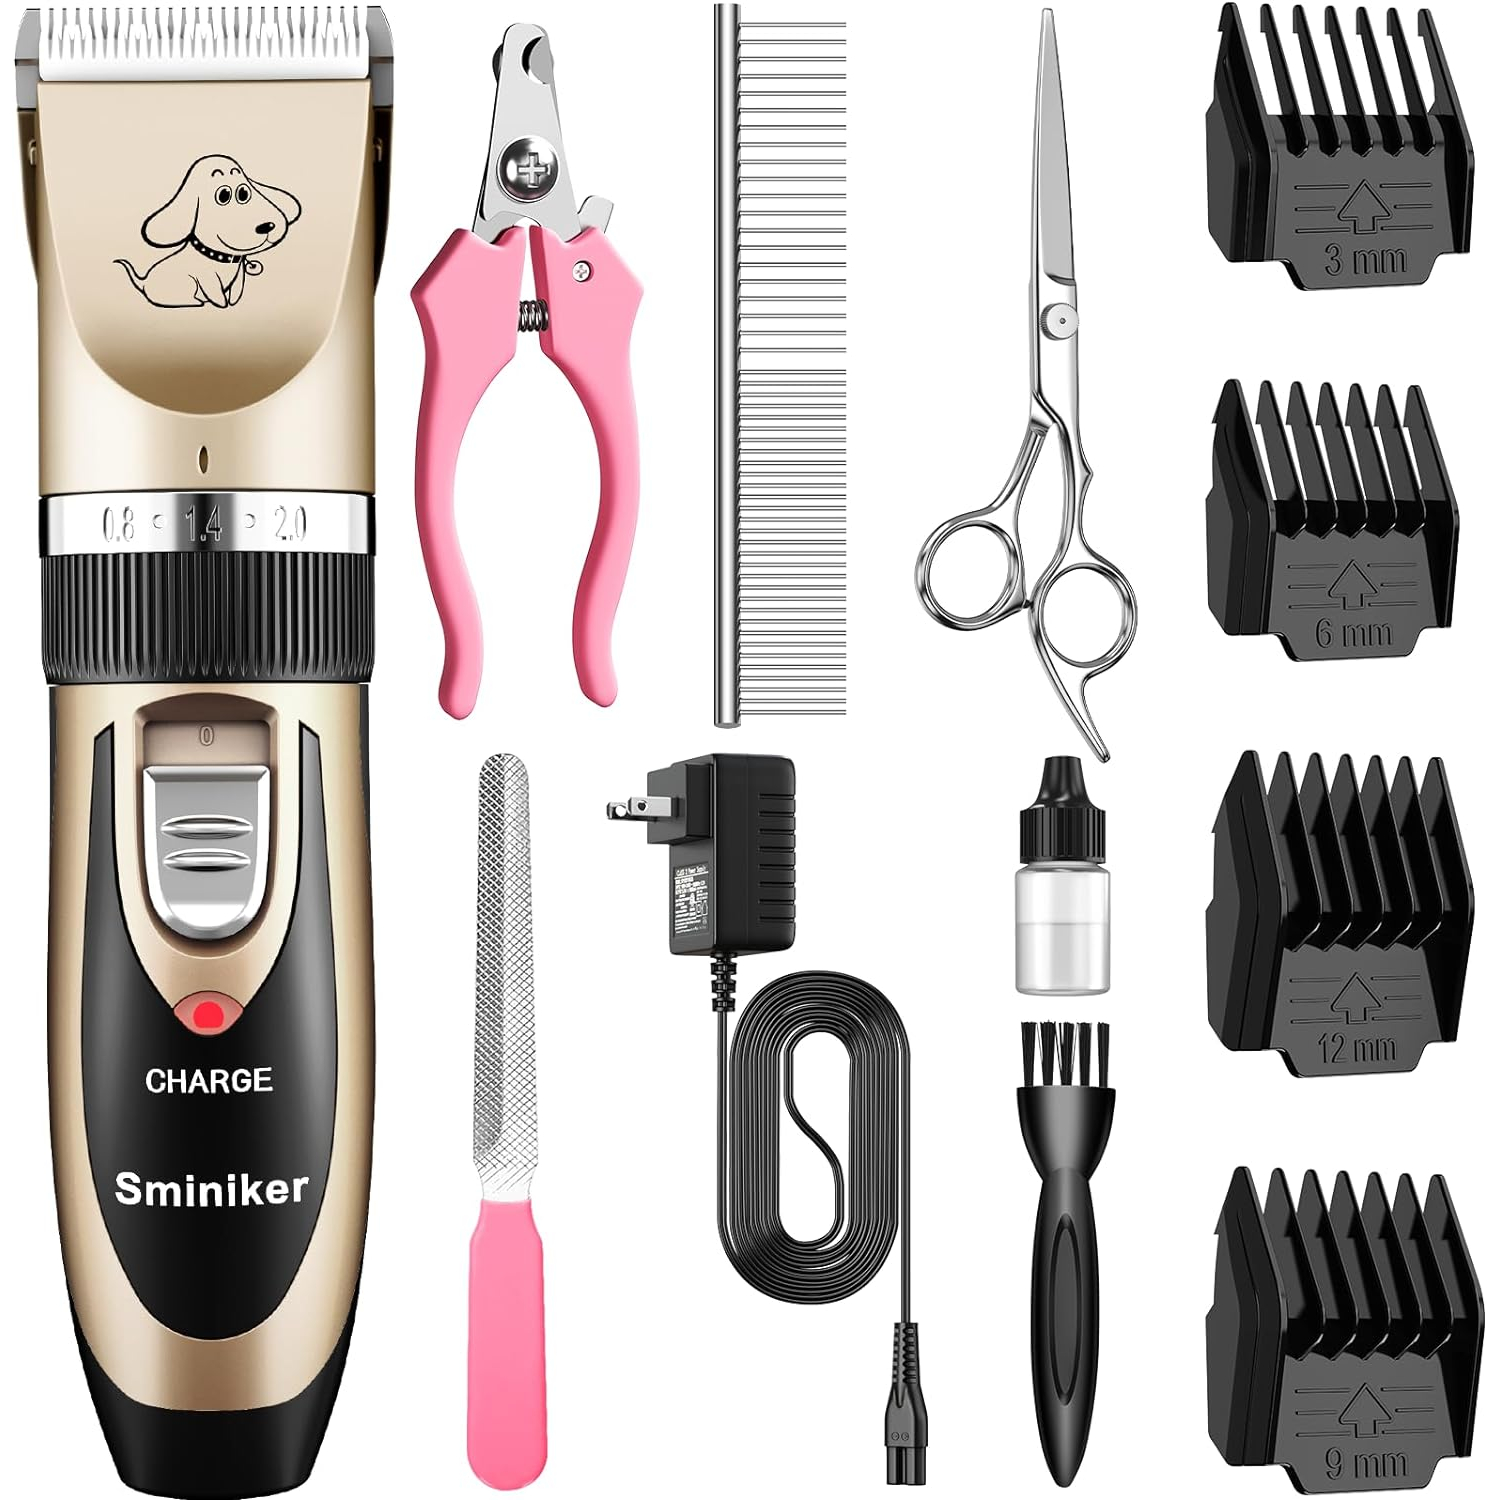 Sminiker Professional Rechargeable Grooming Clipper